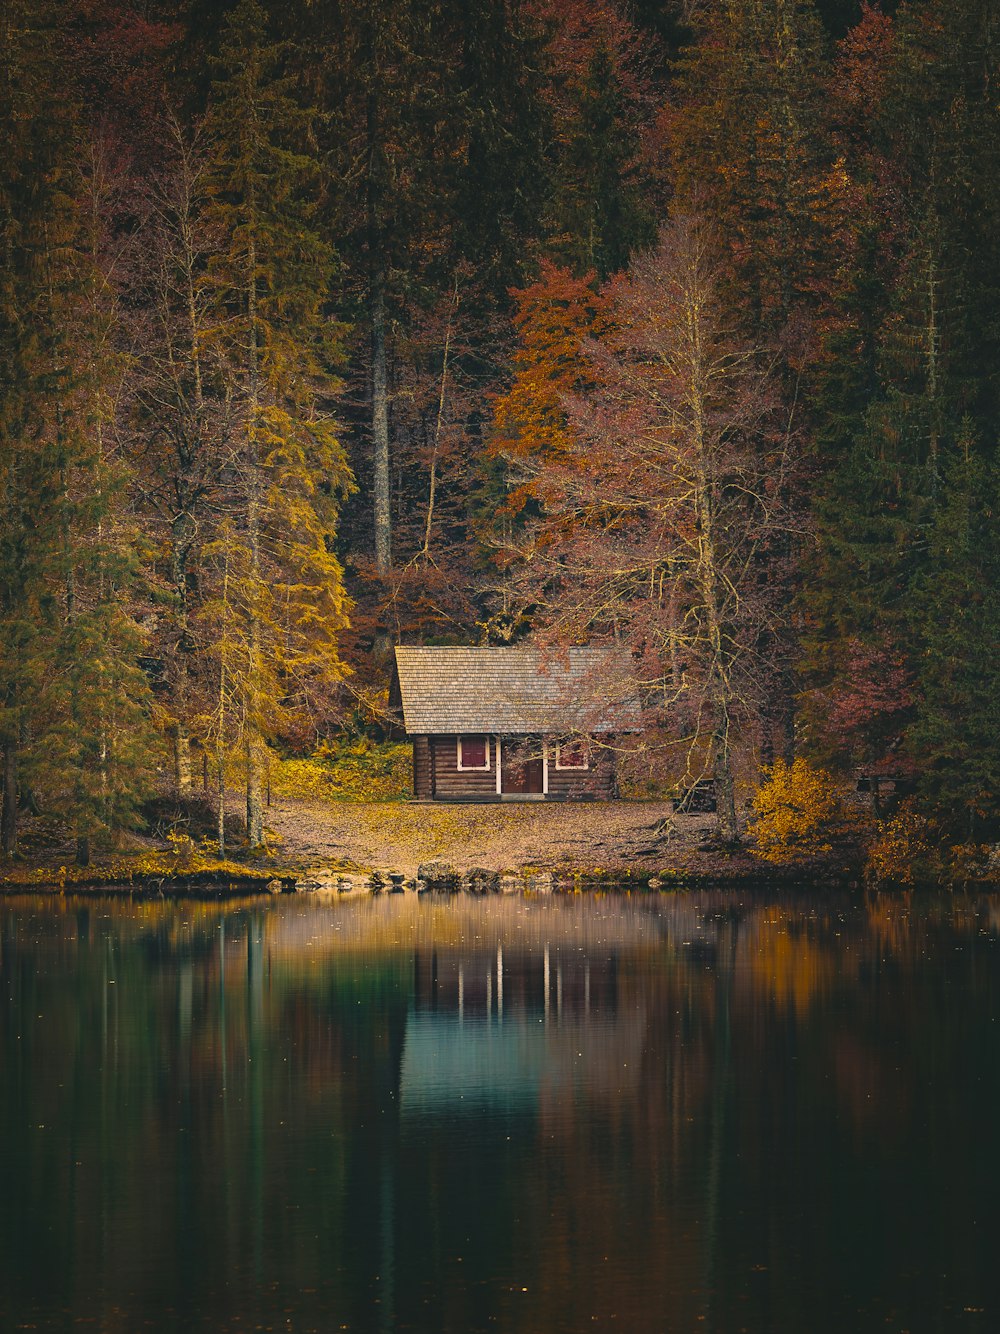 a cabin on a lake surrounded by trees